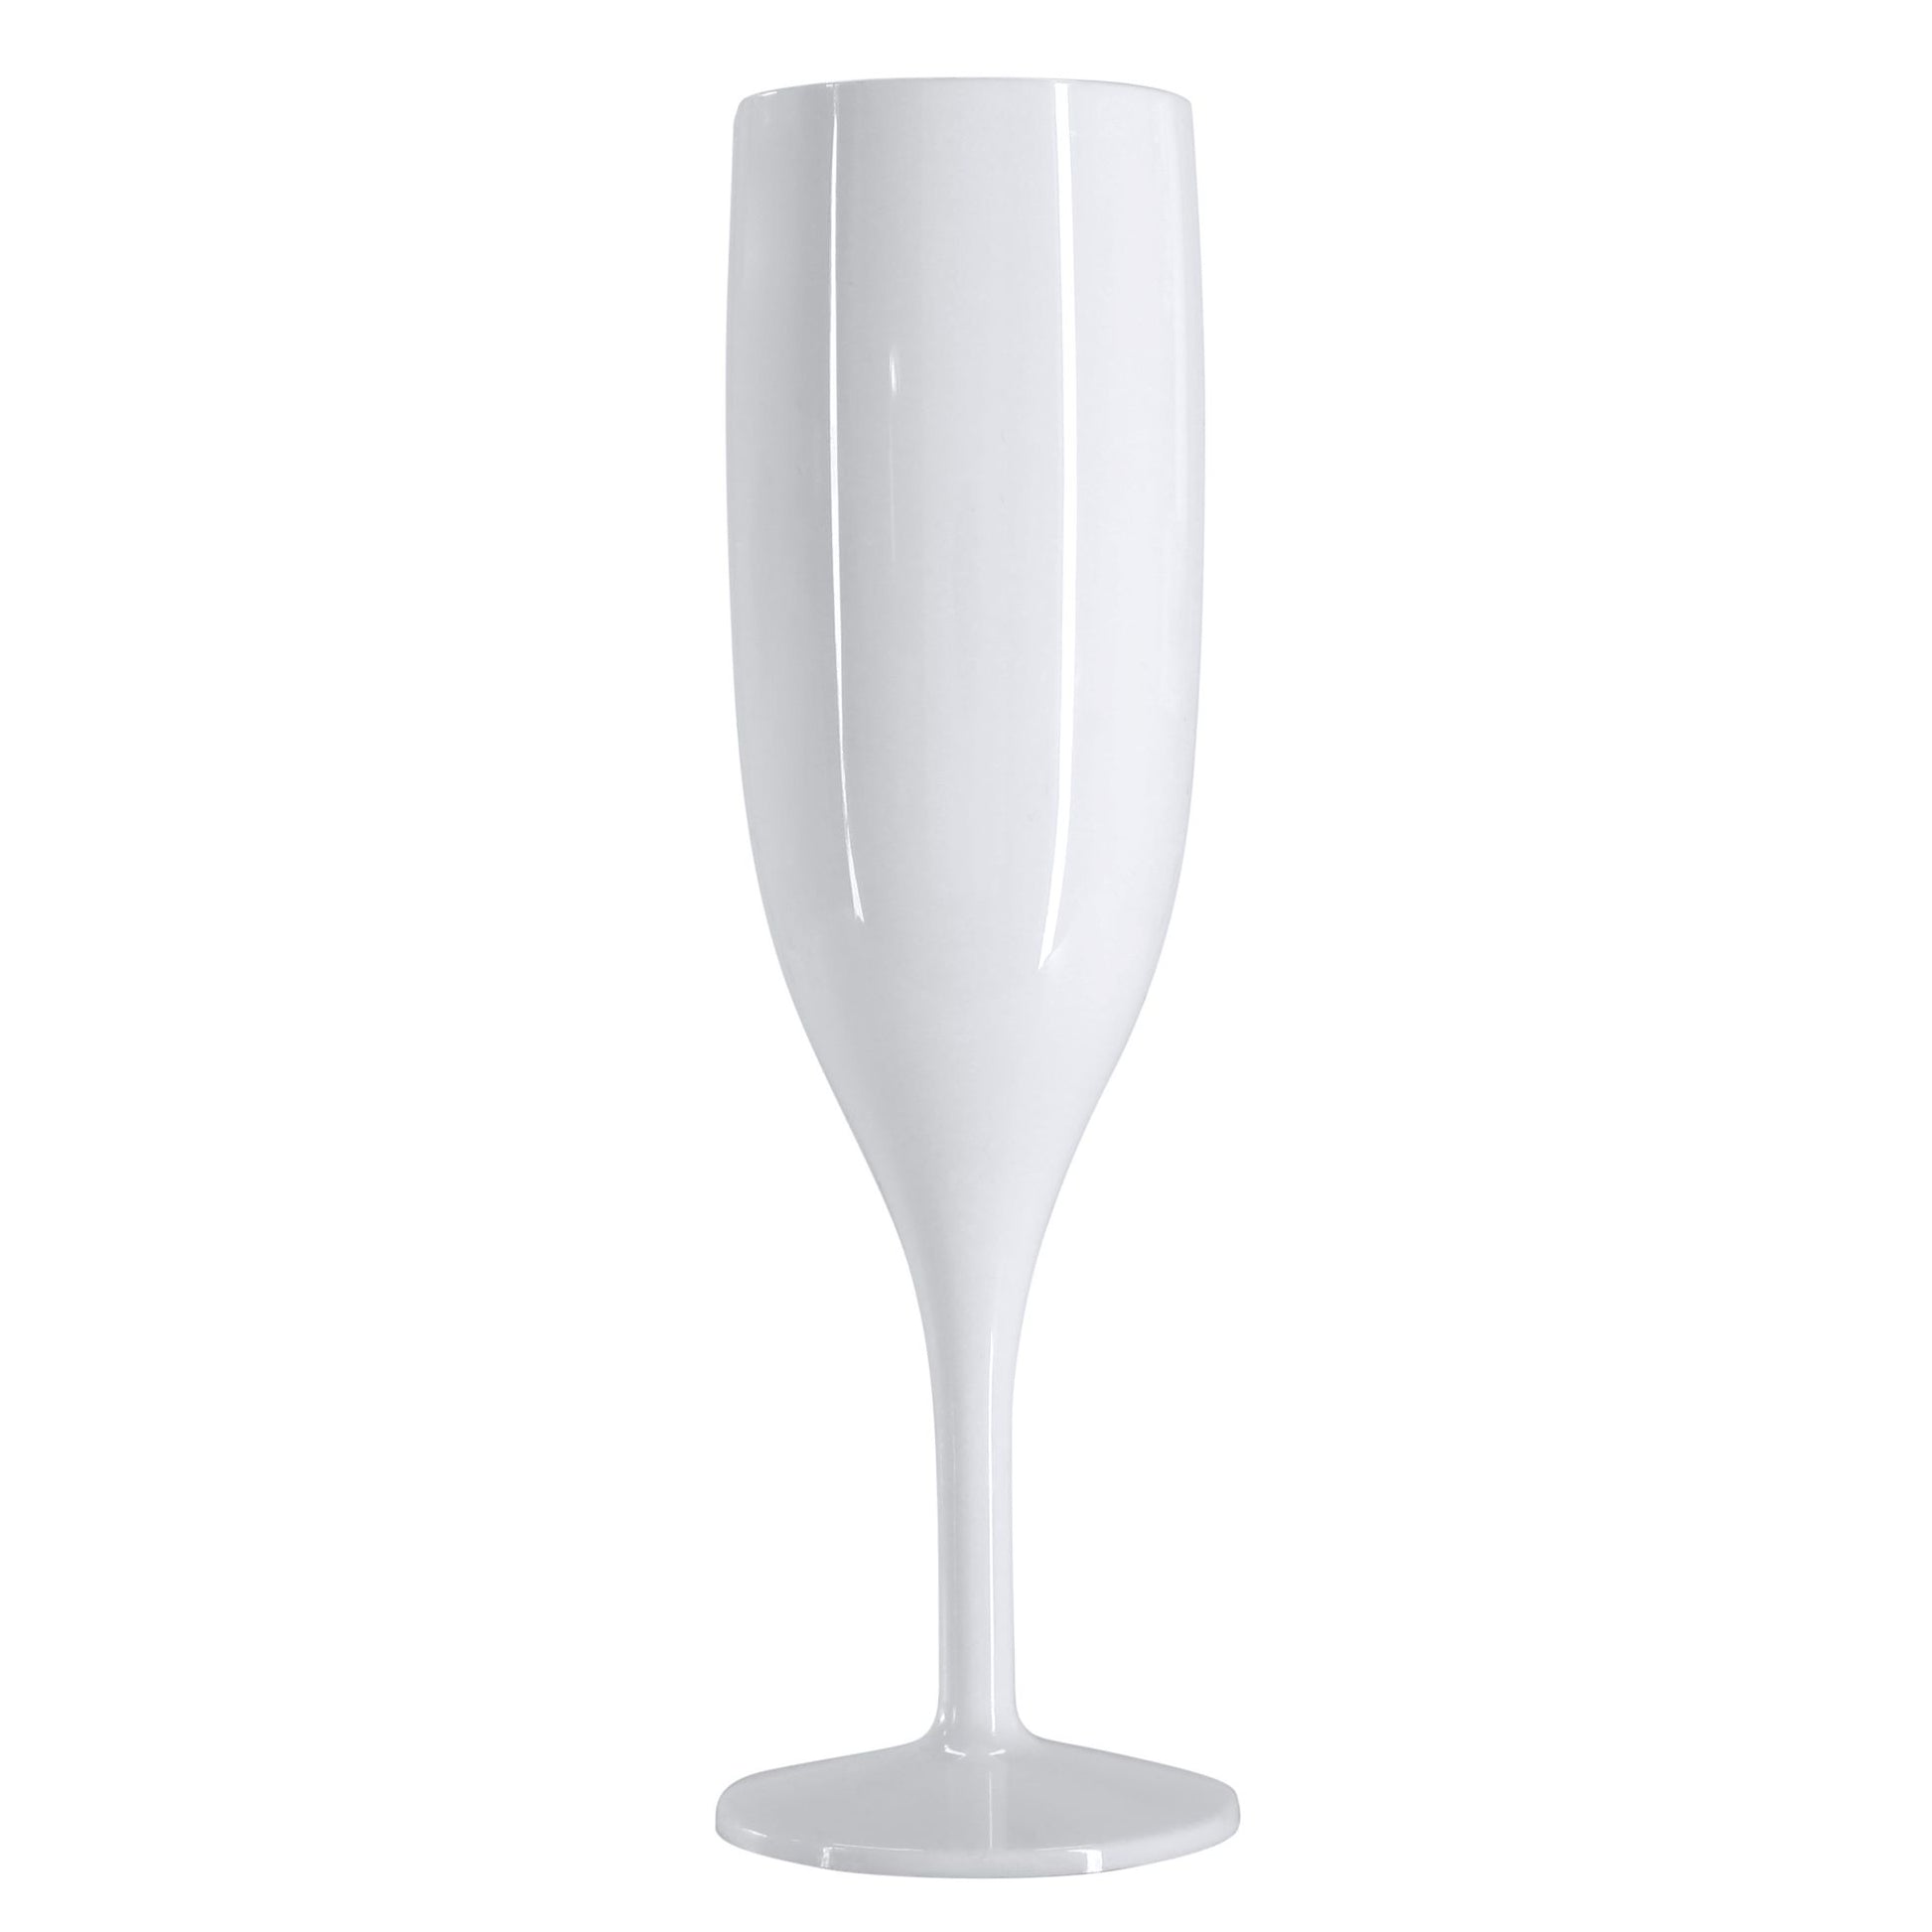 48 x White Prosecco Flutes – Made from Strong Reusable Plastic in glossy Bright White Colour 1-Piece Champagne Glass (Pack of 48 Glasses) for use Indoors and Outdoors, Wedding, Parties, Bridal Shower-5056020186212-EY-PP-079-Product Pro-Baby Shower, Bridal Shower, Hen Do, Reusable Flutes, White Champagne Flutes, White Champagne Glasses, White Flutes, White Prosecco Flutes, White Prosecco Glasses